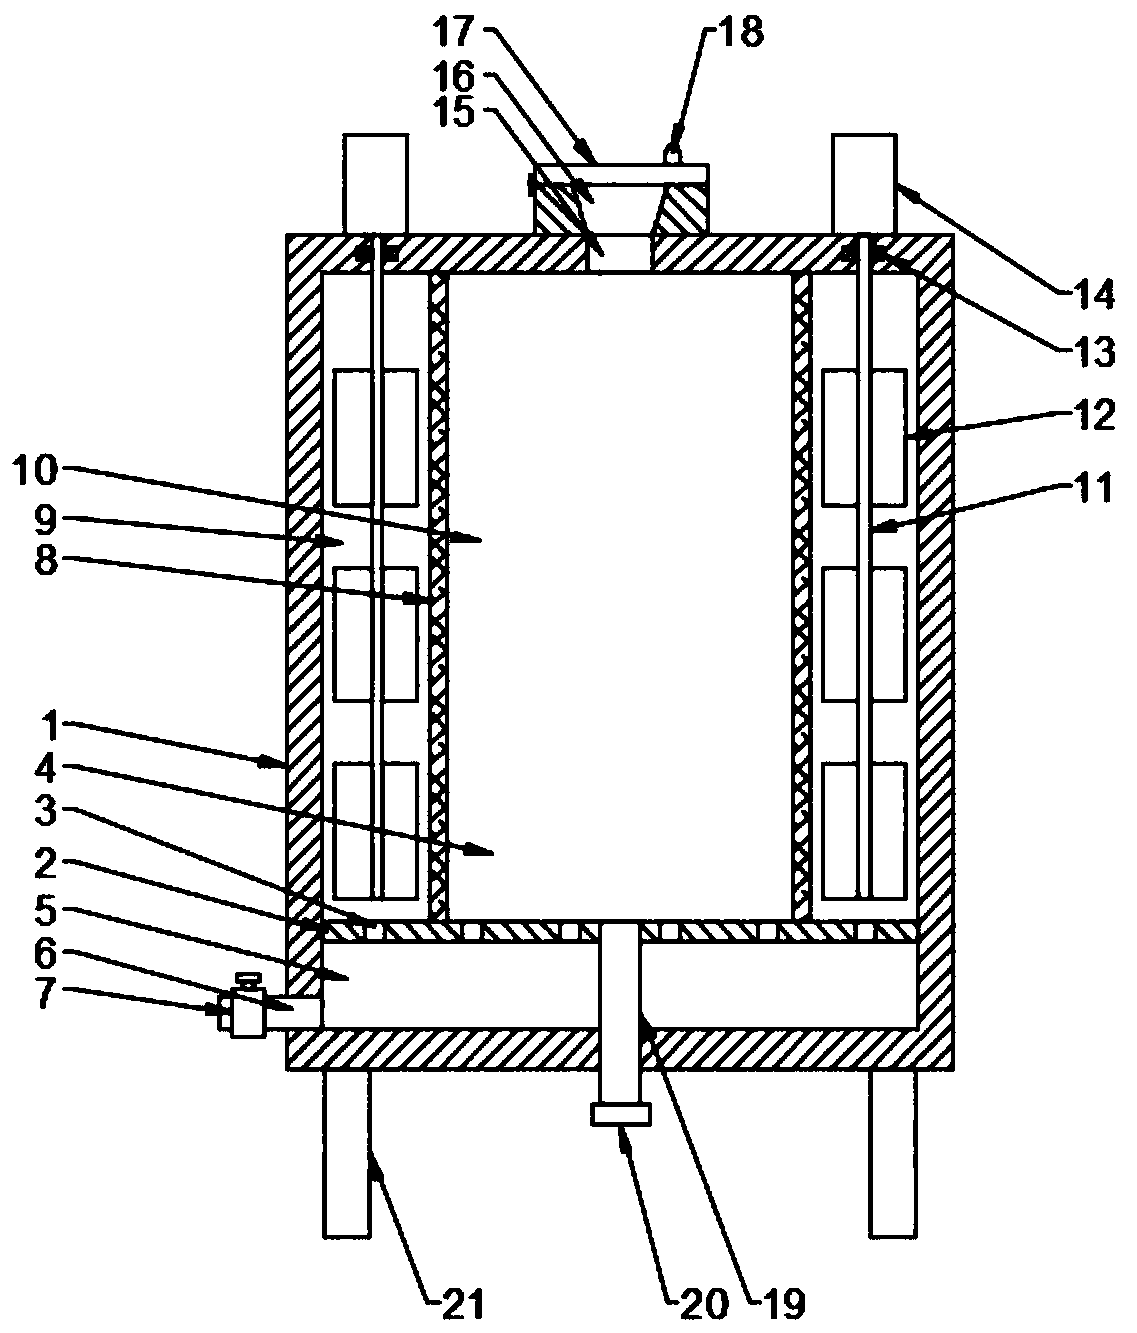 A wool cleaning device for animal husbandry based on vortex extrusion cleaning technology